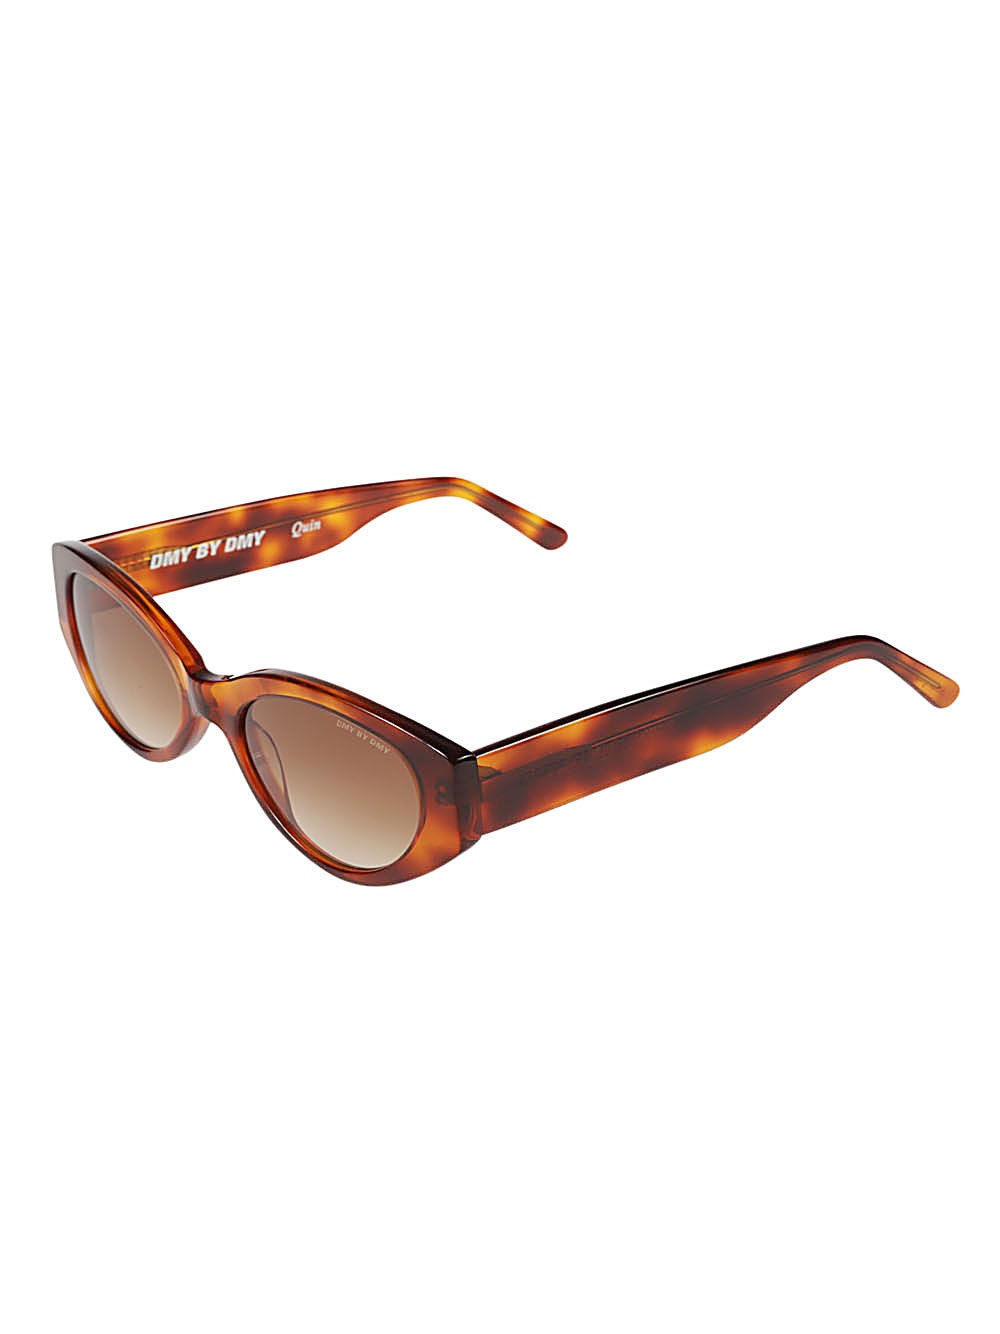 DMY BY DMY - Quin Sunglasses DMY BY DMY